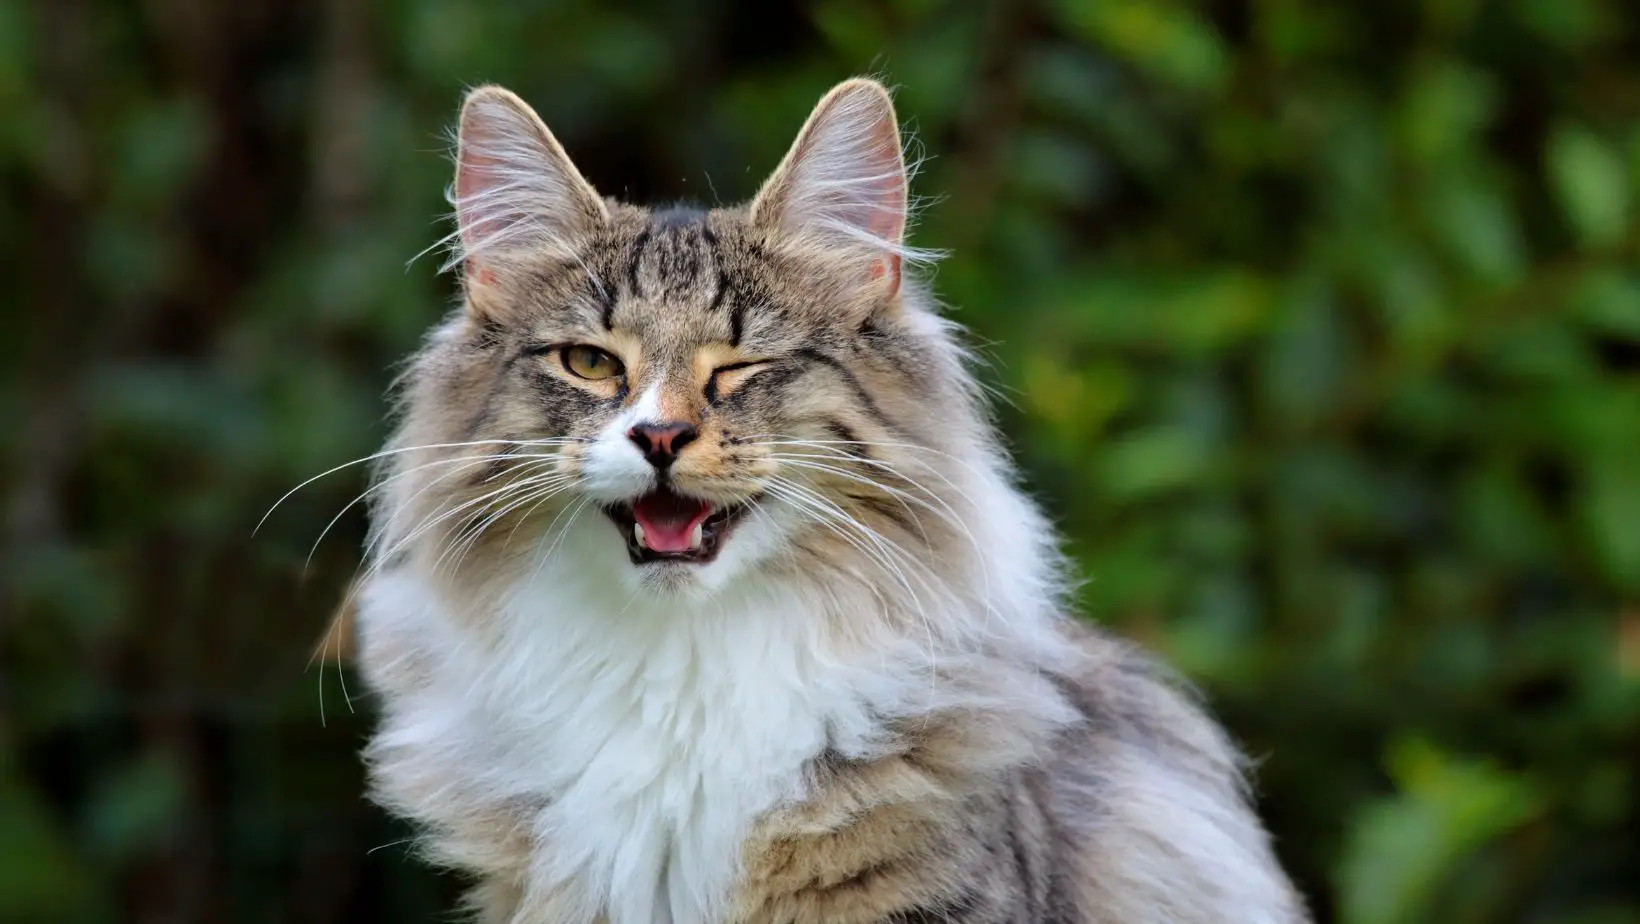 What Does It Mean When a Cat Winks at You?